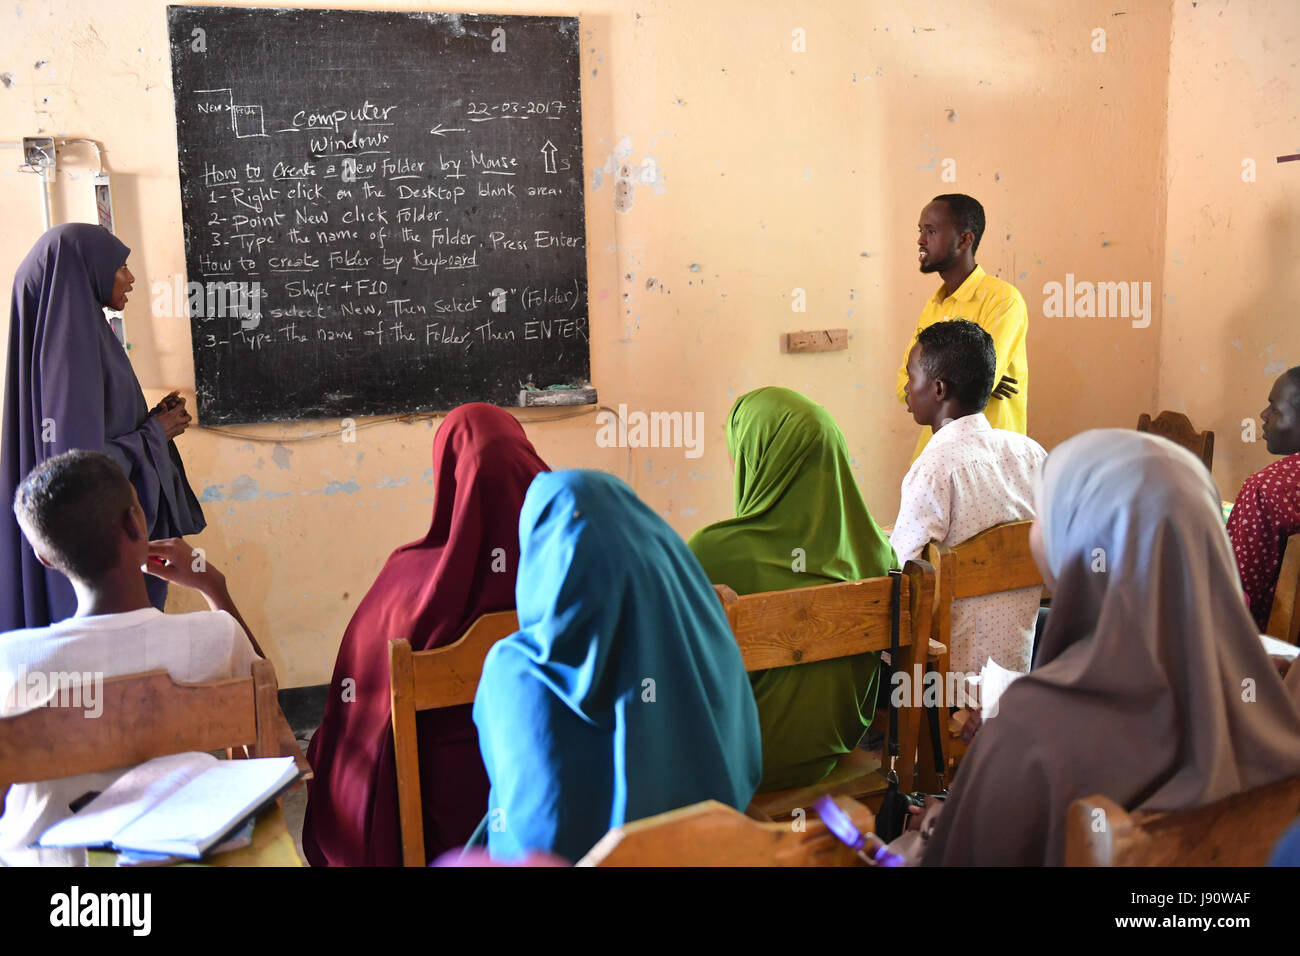 (170531) -- MOGADISHU, May 31, 2017 (Xinhua) -- Trainees take a computer class at the training centre ELMAN, a non-government organization (NGO) which cooperates with the United Nations Children's Fund (UNICEF), in Mogadishu, Somalia, March 22, 2017. By the year of 2017, more than 1630 children and teenagers have taken vocational training courses such as automobile maintenance, basic electricity knowledge and circuit maintenance skills, mobile phone repairing and computer using. A vast majority of the students here were former child soldiers or affected by armed groups. The knowledge and skill Stock Photo